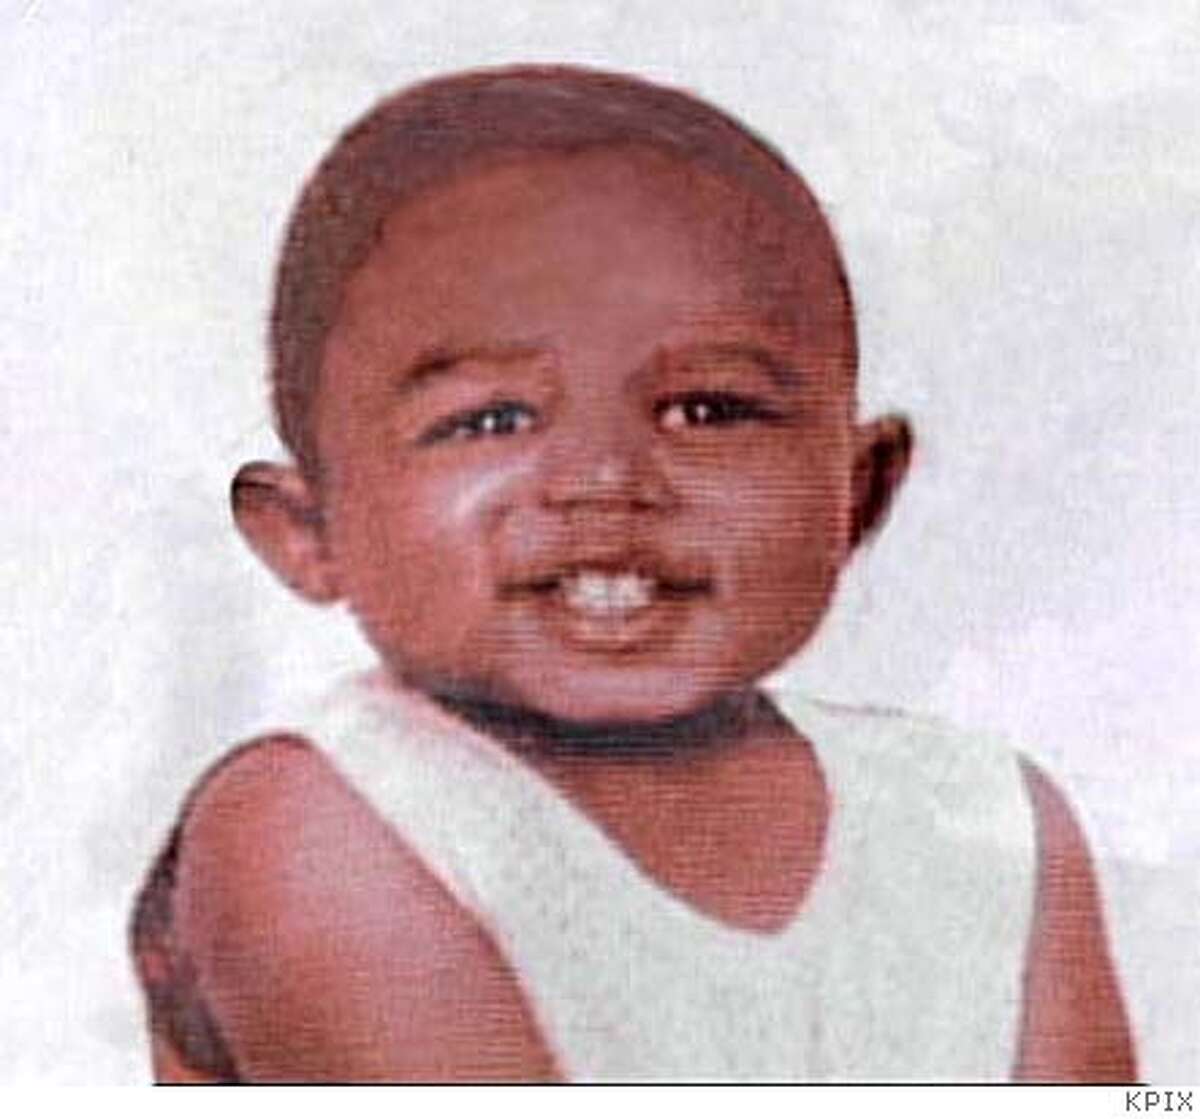 A 3-year-old boy was killed in what Alameda County officials are calling the worst case of child abuse they've ever seen. Chazarus Hill was allegedly killed Saturday by his father, Chazarus Hill Sr., who admitted his involvement and was arrested for investigation of murder. The two were playing flashcards and the boy's punishment for wrong answers were a fist, a belt and whittled sticks. Pathologists at the Alameda County Coroner's Office agreed the boy died from abusive injuries that left the child bruised from head to toe. The death brings Oakland's homicide count for 2003 to 94 ; 9/22/03 in . / KPIX